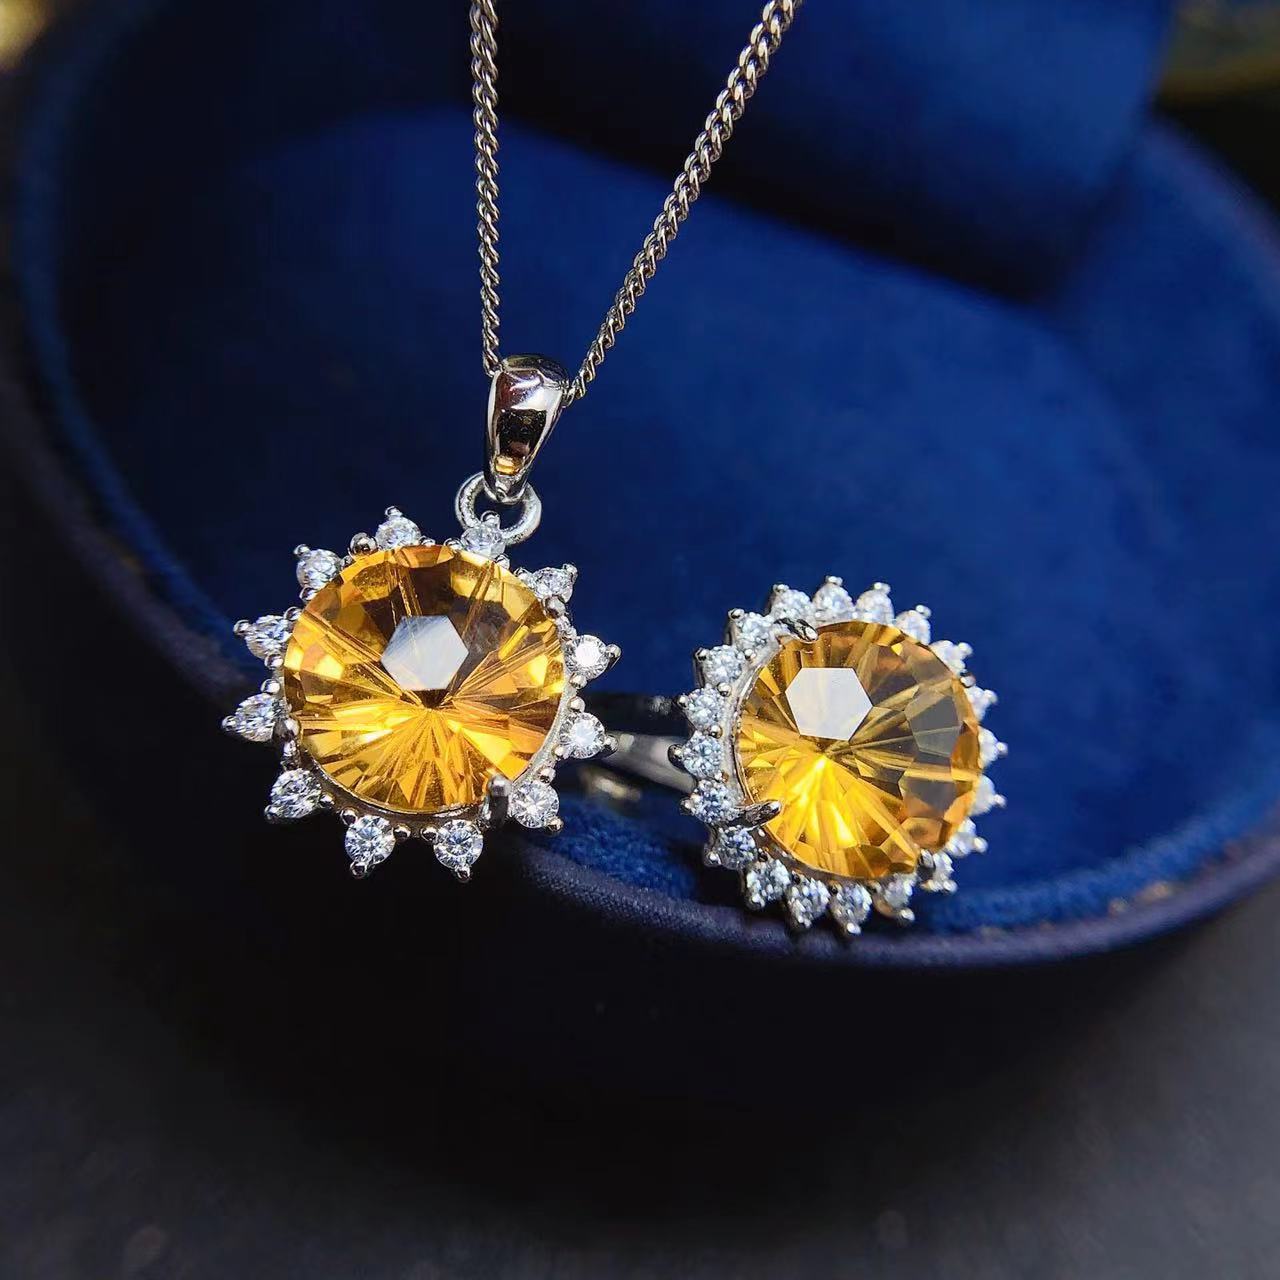 Women's Silver Jewelry Set with Natural Citrine on display